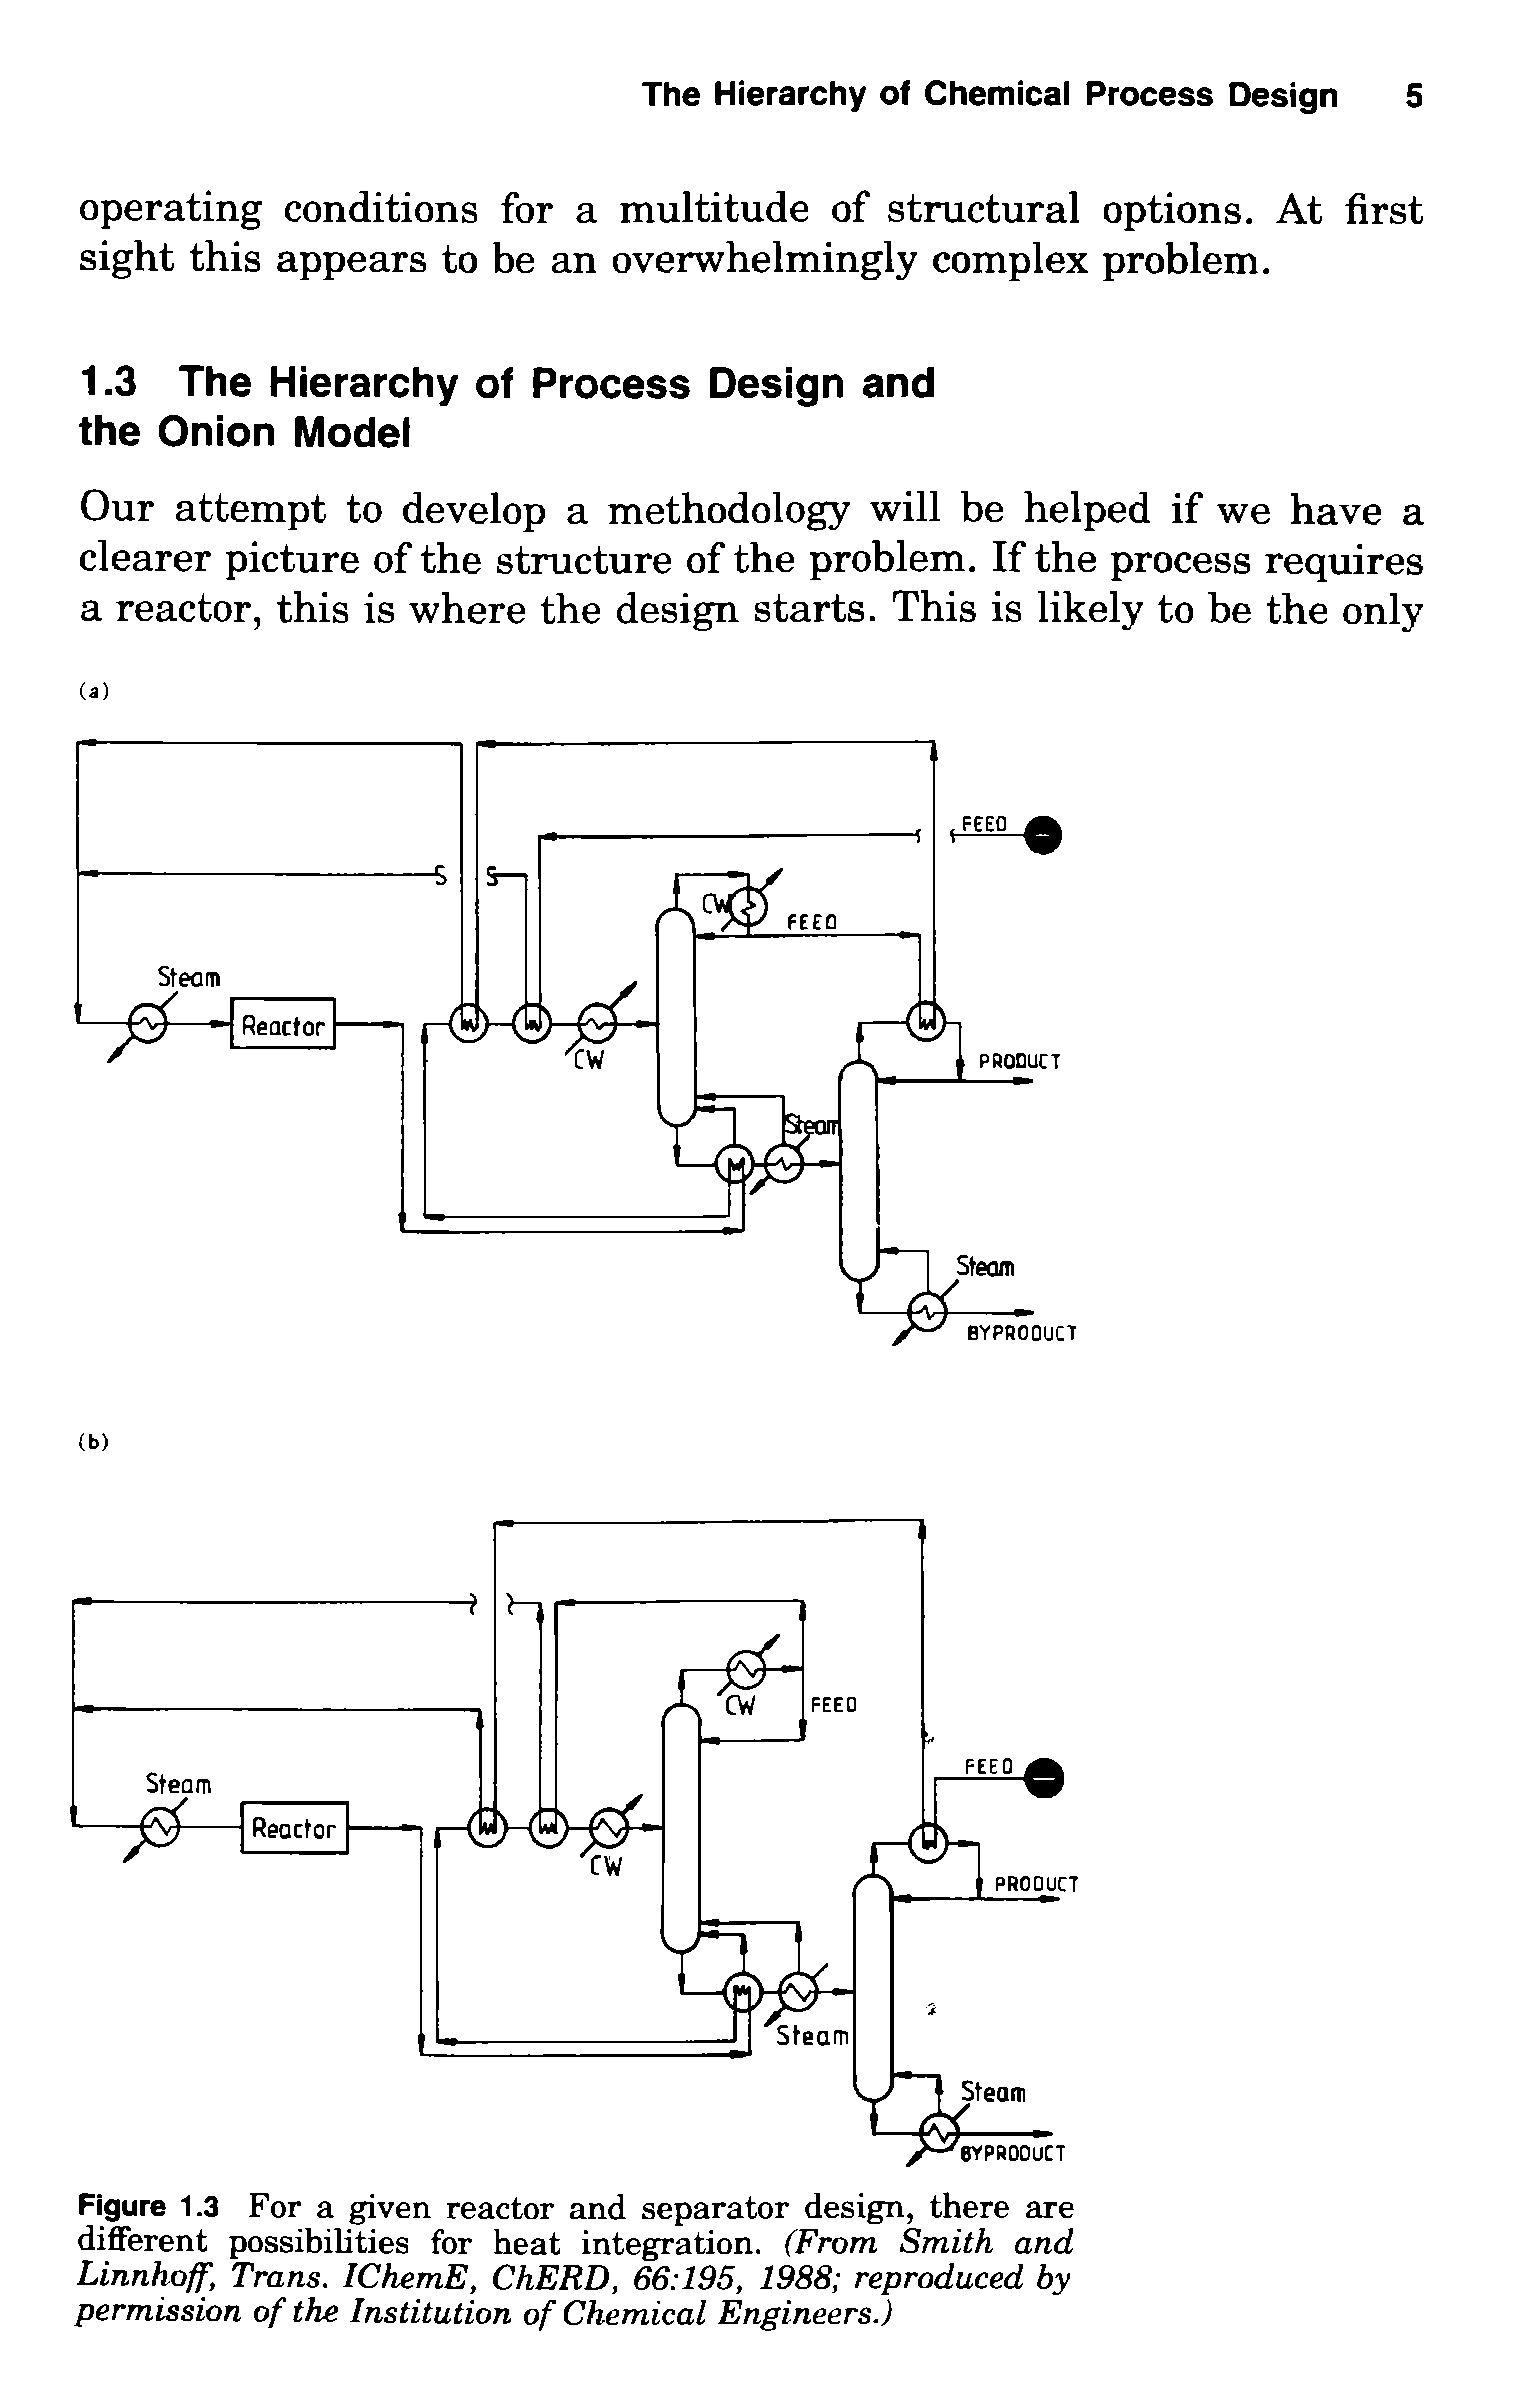 Figure 1.3 For a given reactor and separator design, there are different possibilities for heat integration. (From Smith and Linnhoff, Trans. IChemE, ChERD, 66 195, 1988 reproduced by permission of the Institution of Chemical Engineers.)...